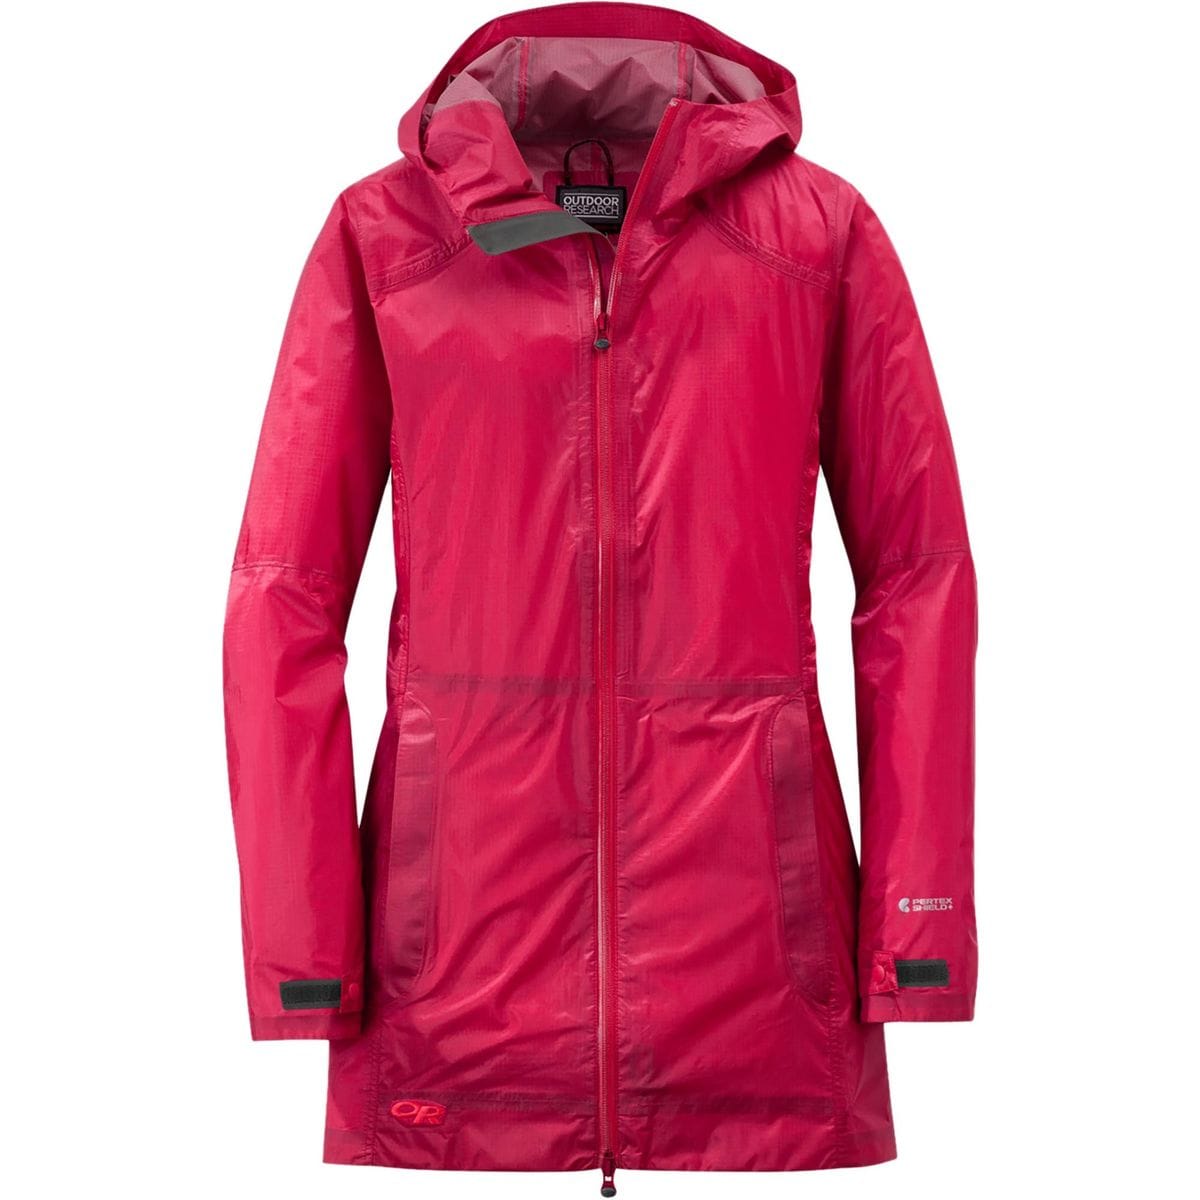 Women's Jackets - Country / Outdoors Clothing